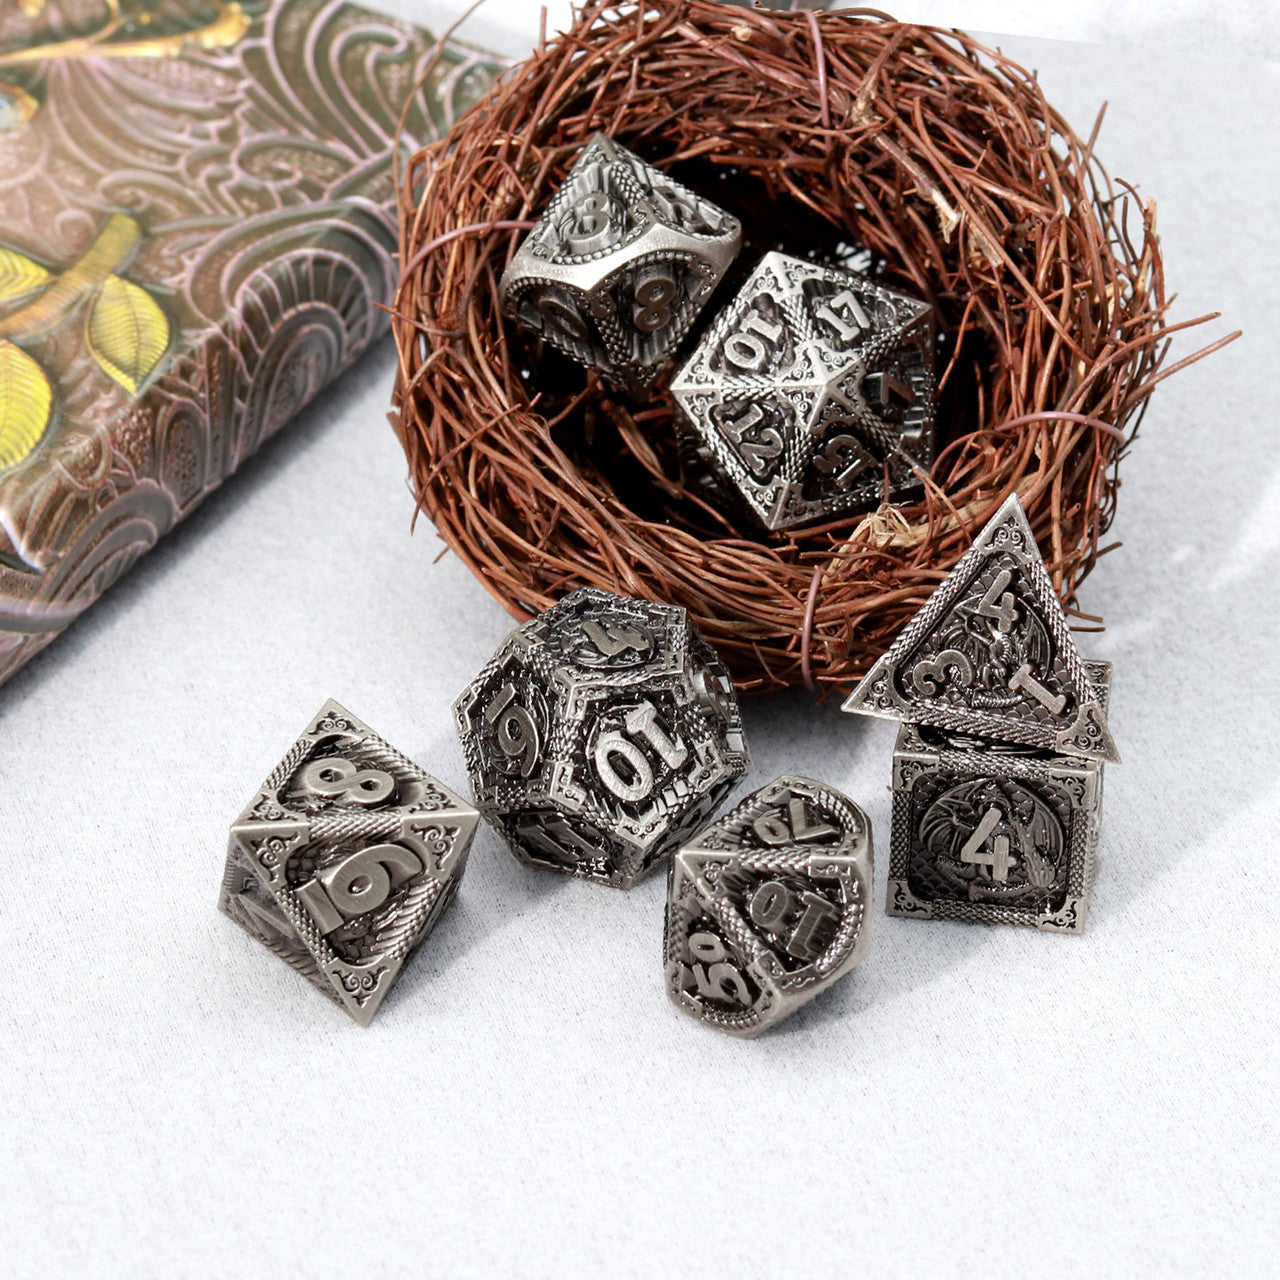 Haxtec Antique Iron Metal DND Dice Set With Dragon Pattern Leather Dice Bag for Dungoens and Dragons RPG Gifts